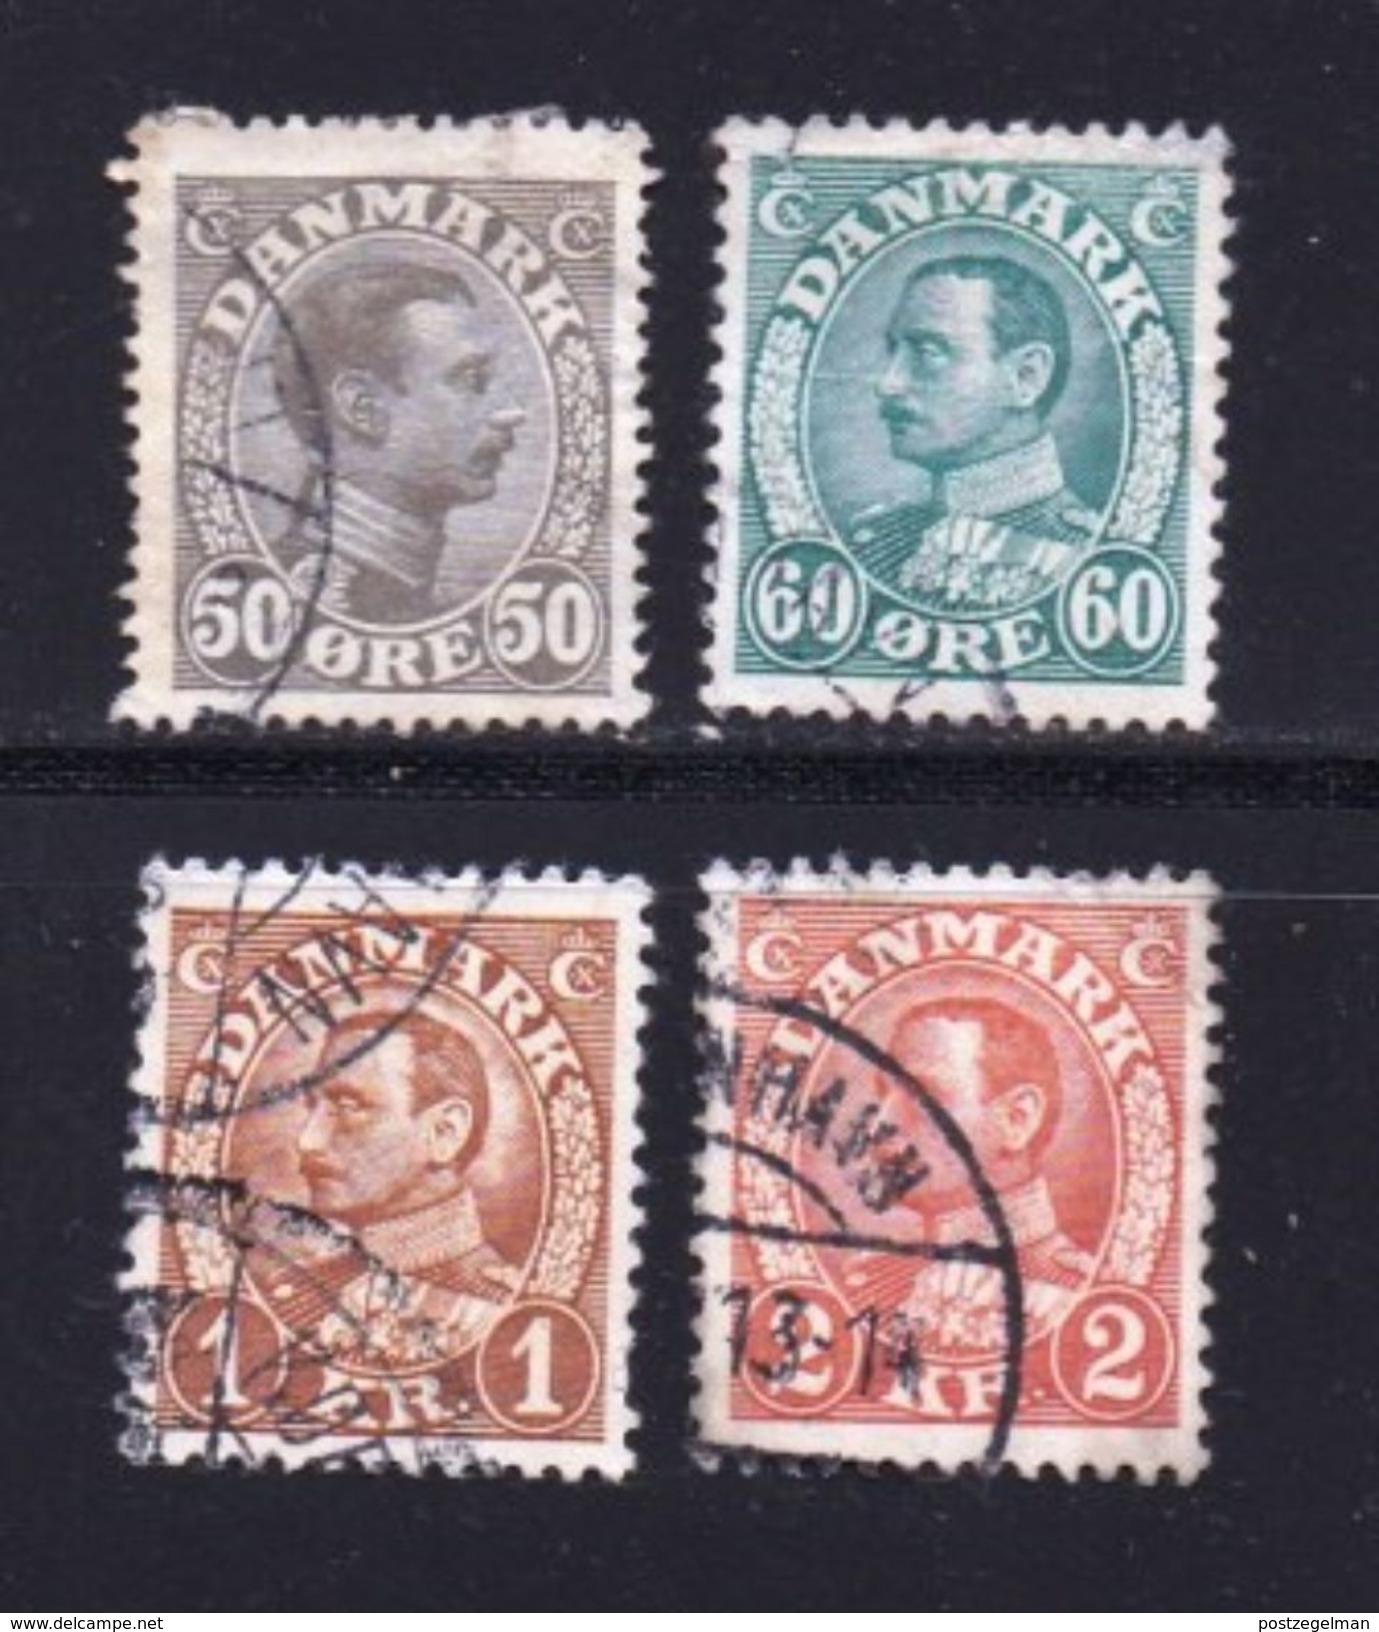 DENMARK, 1934, Used Stamp(s),Definitives, Christian X,  Mi 210-214, #10033, 4 Values Only - Used Stamps